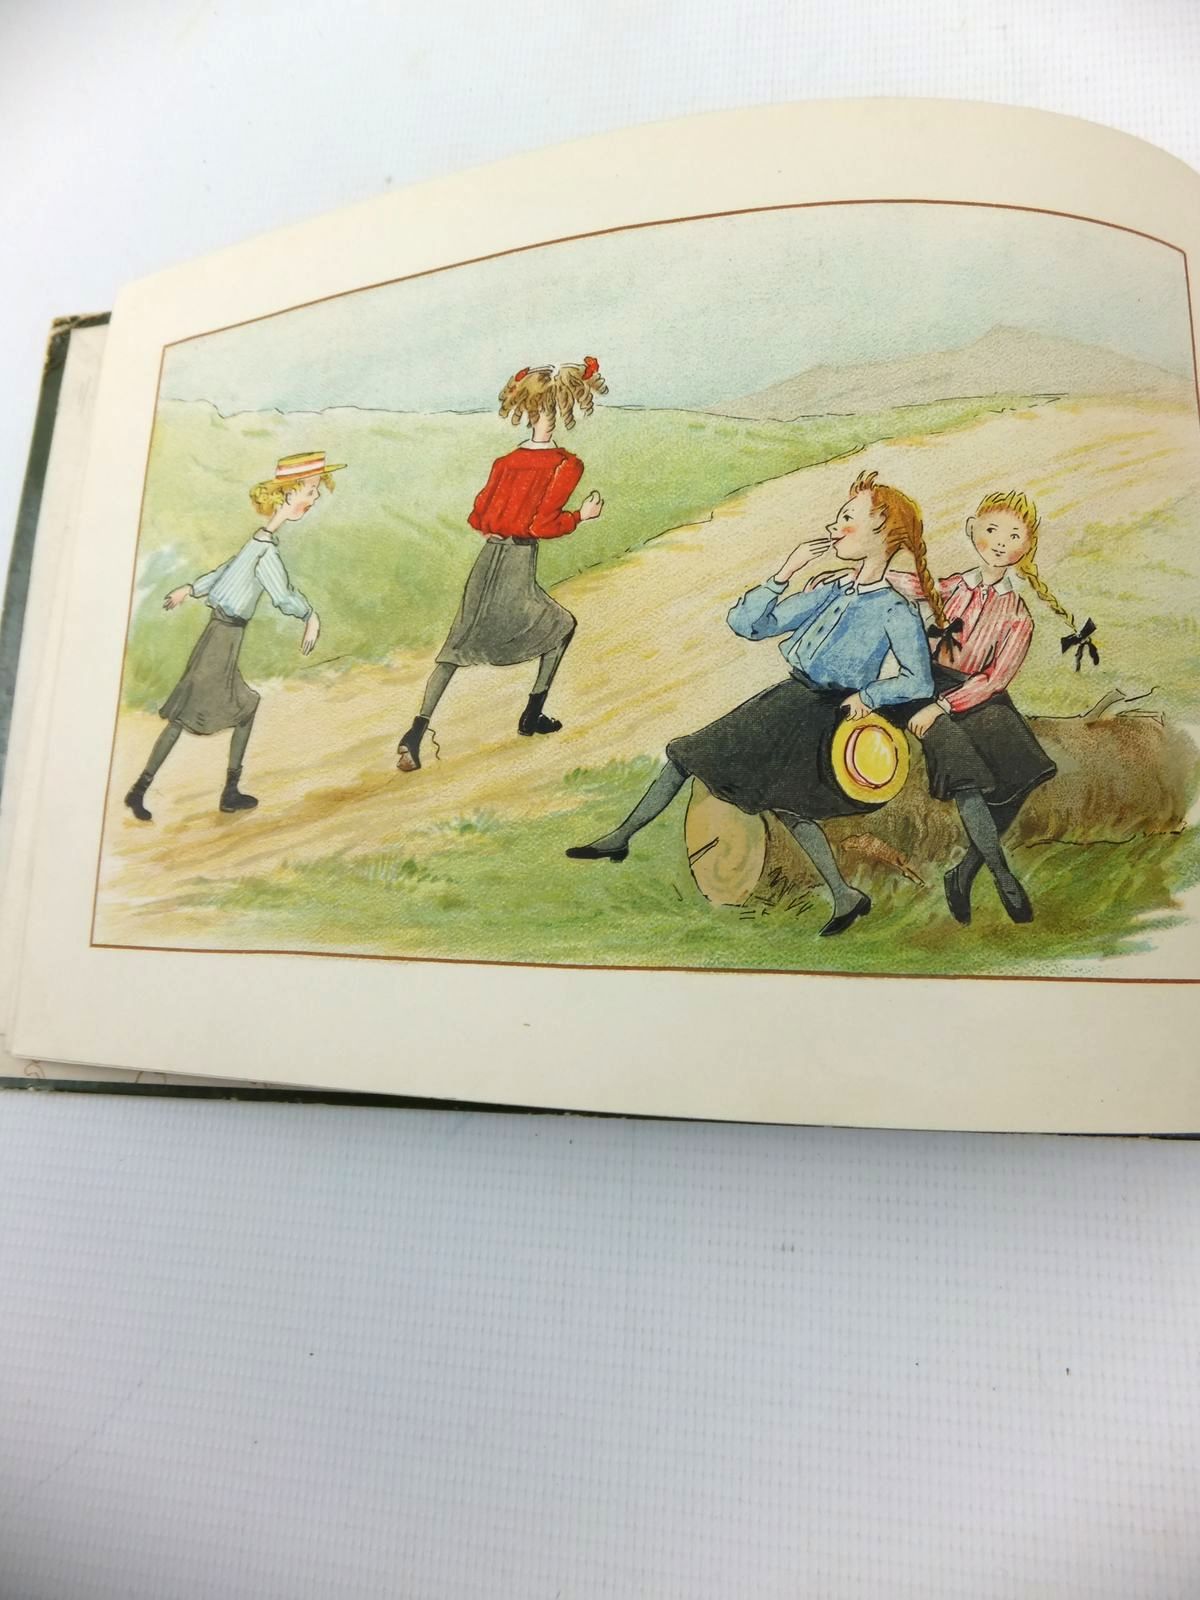 Photo of MOPS VERSUS TAILS written by Ainslie, Kathleen illustrated by Ainslie, Kathleen published by Castell Brothers Ltd., Frederick A. Stokes Company (STOCK CODE: 1814717)  for sale by Stella & Rose's Books